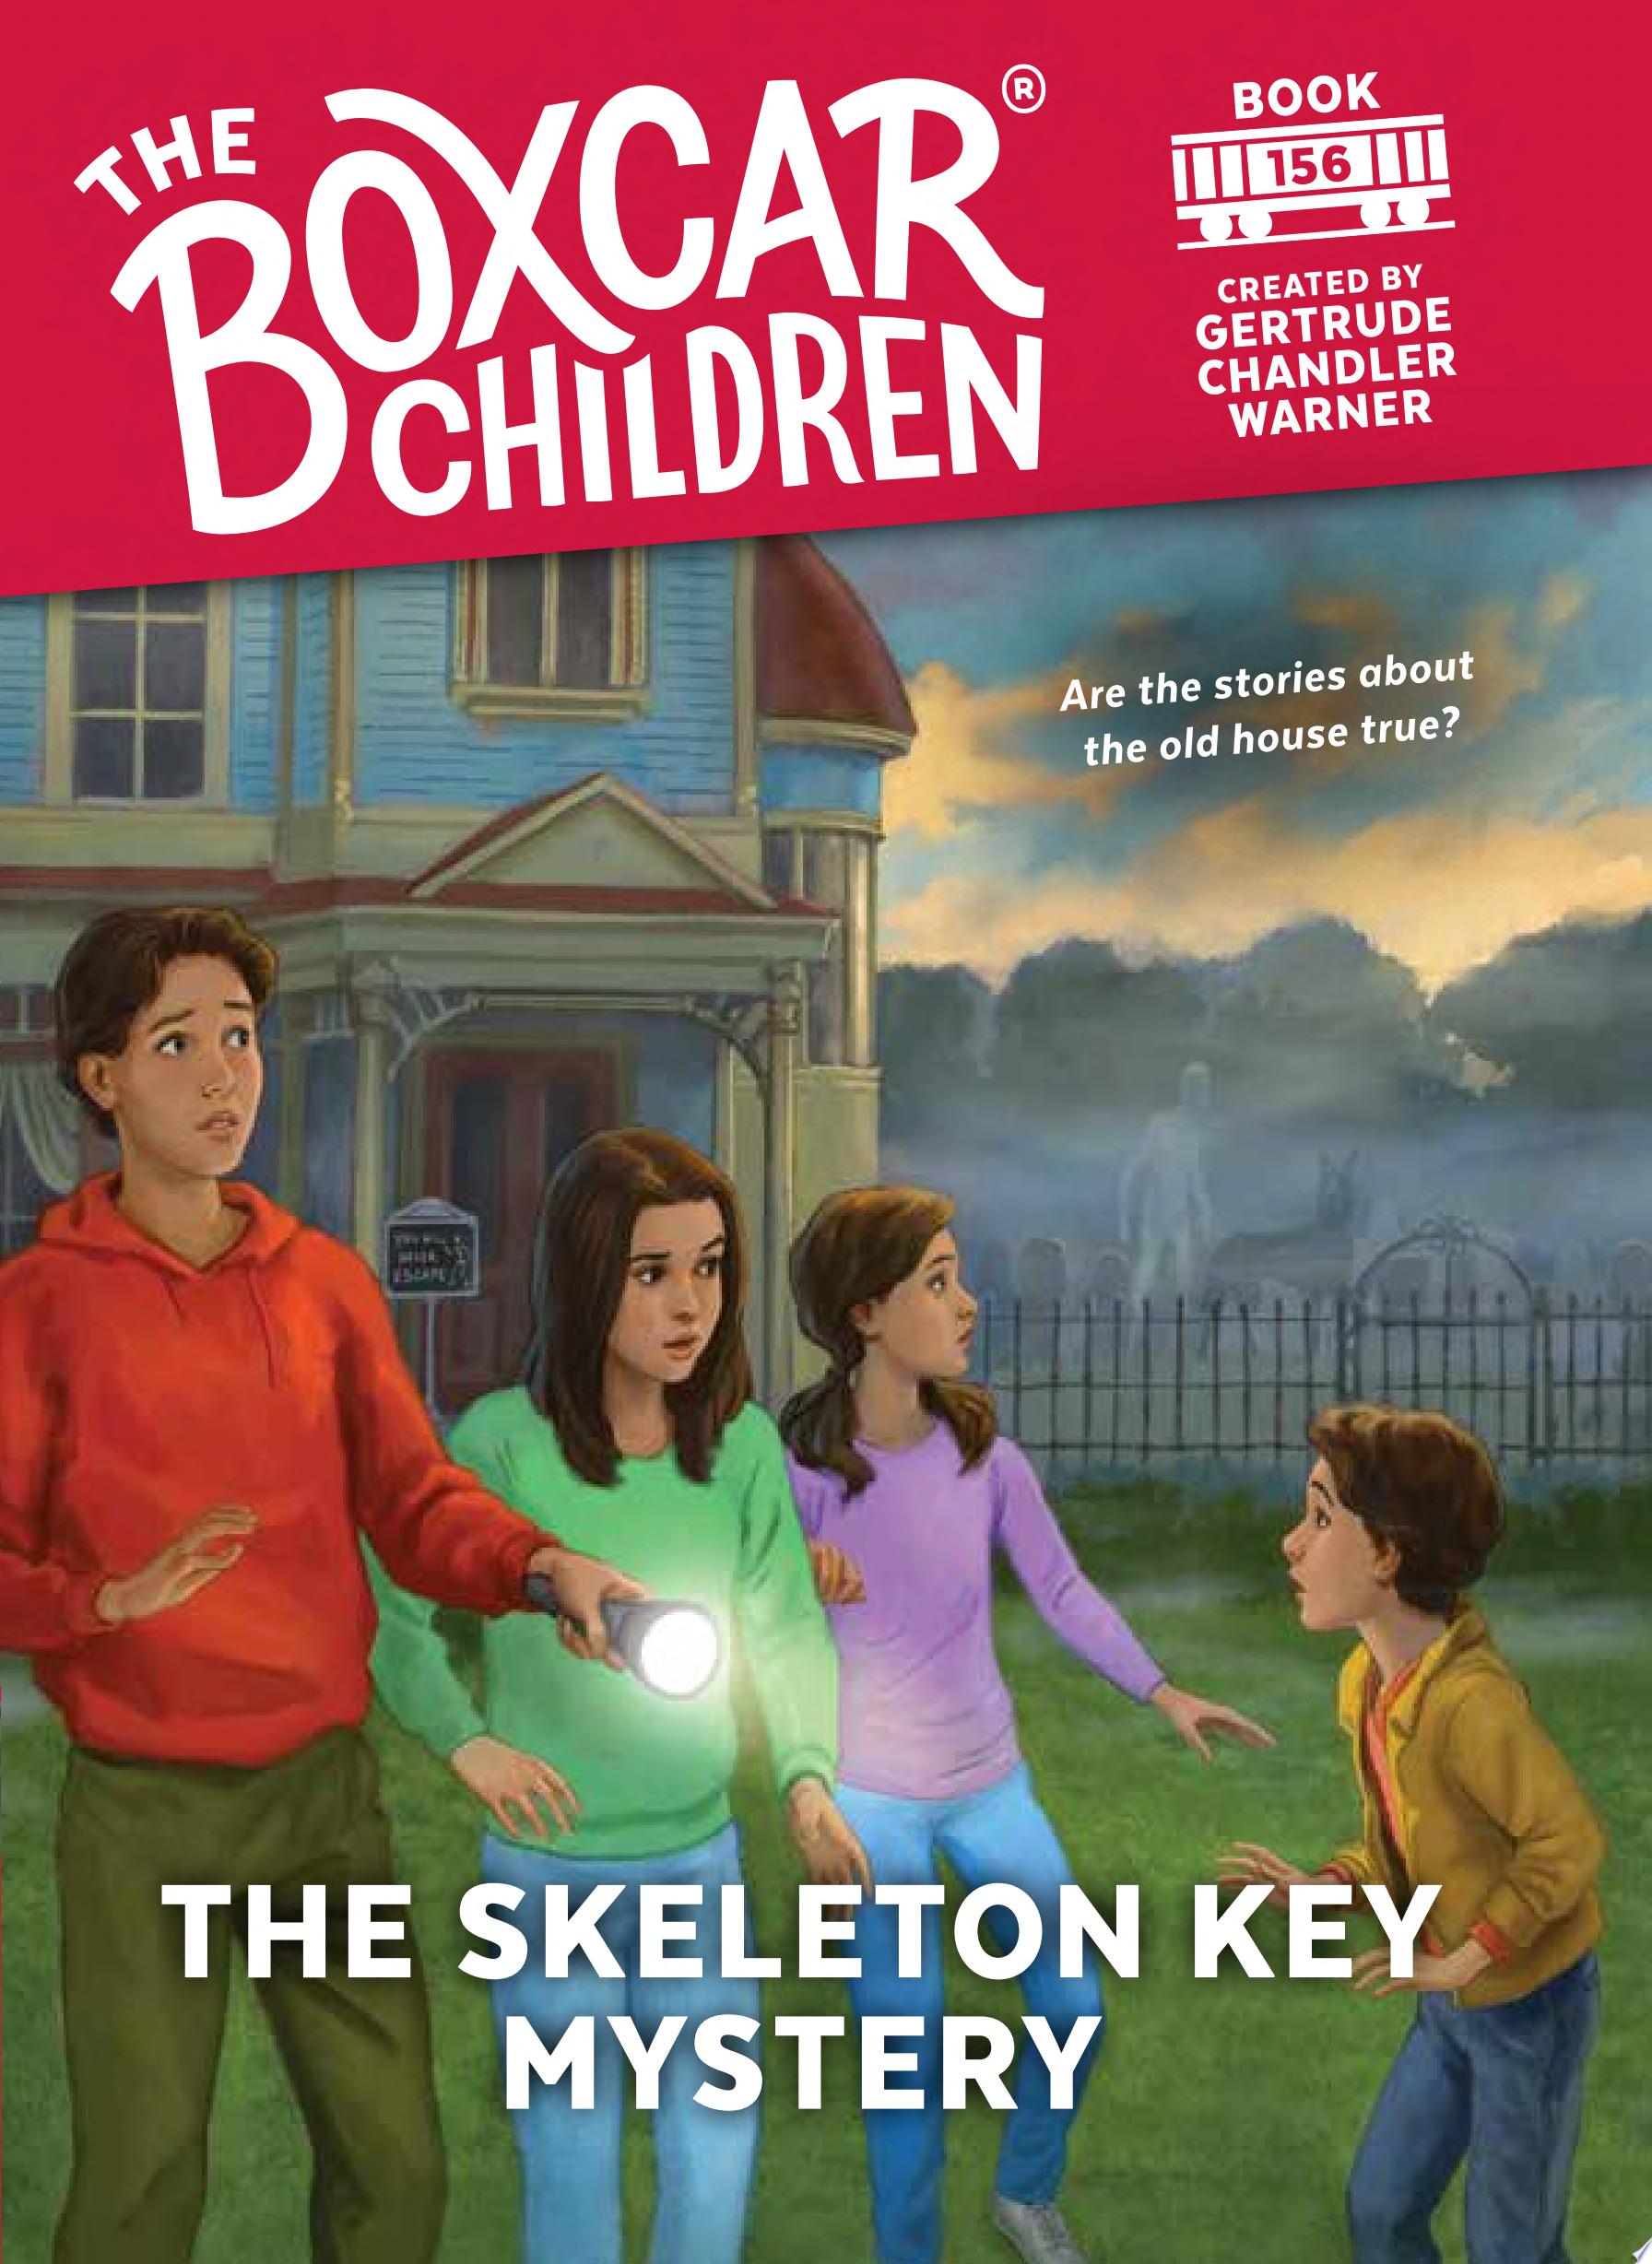 Image for "The Skeleton Key Mystery"